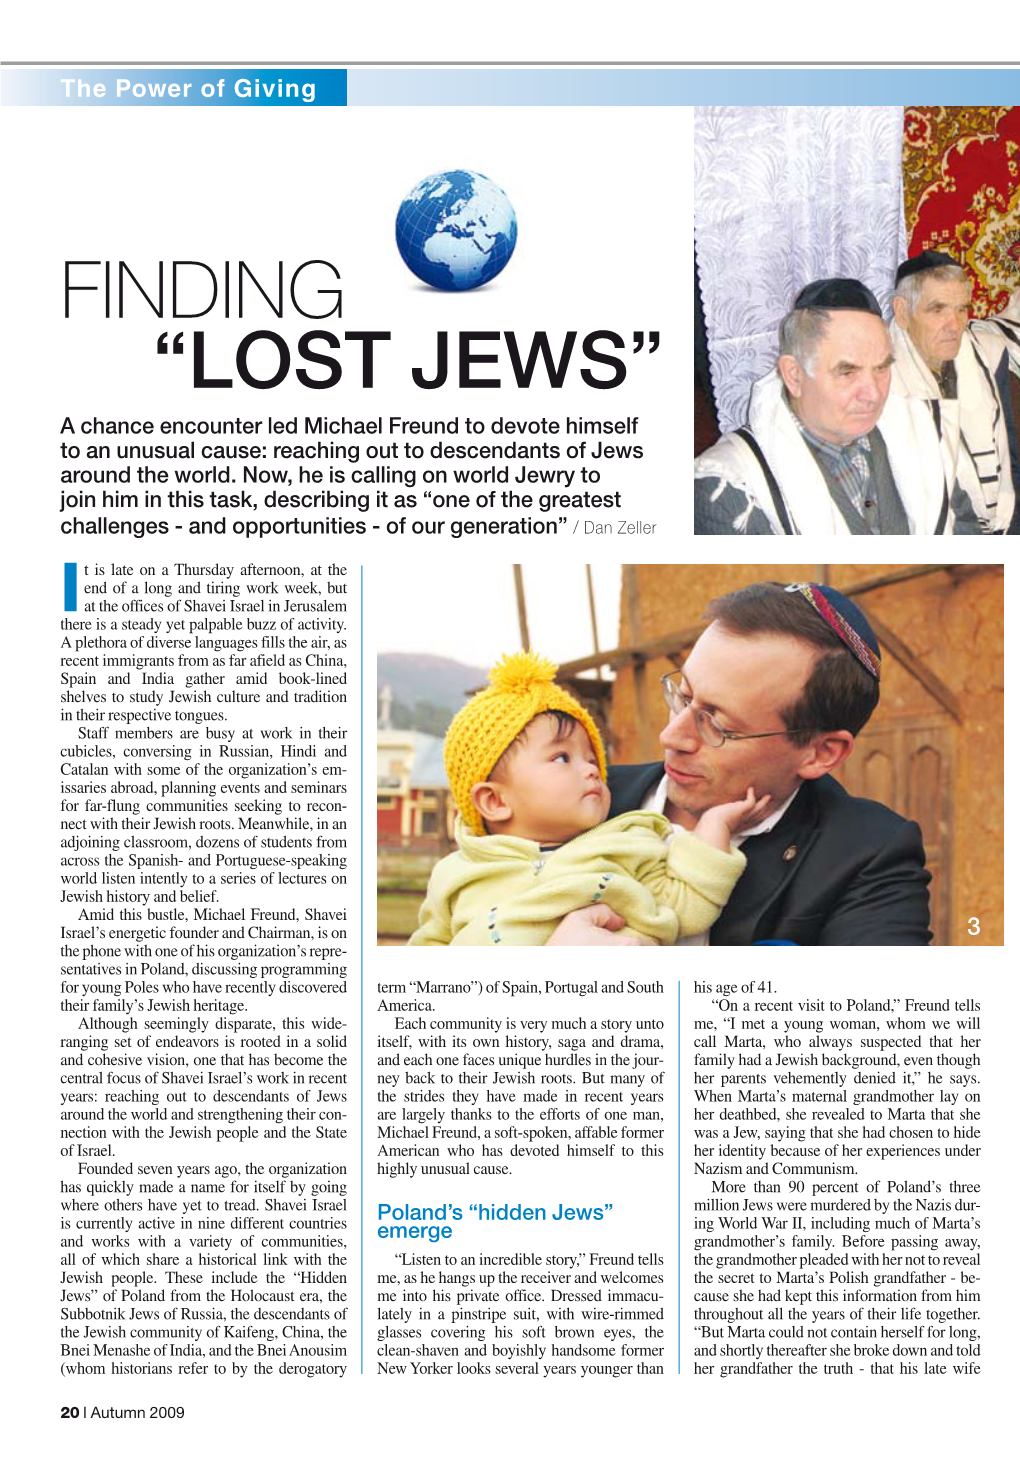 Finding “Lost Jews” a Chance Encounter Led Michael Freund to Devote Himself to an Unusual Cause: Reaching out to Descendants of Jews Around the World